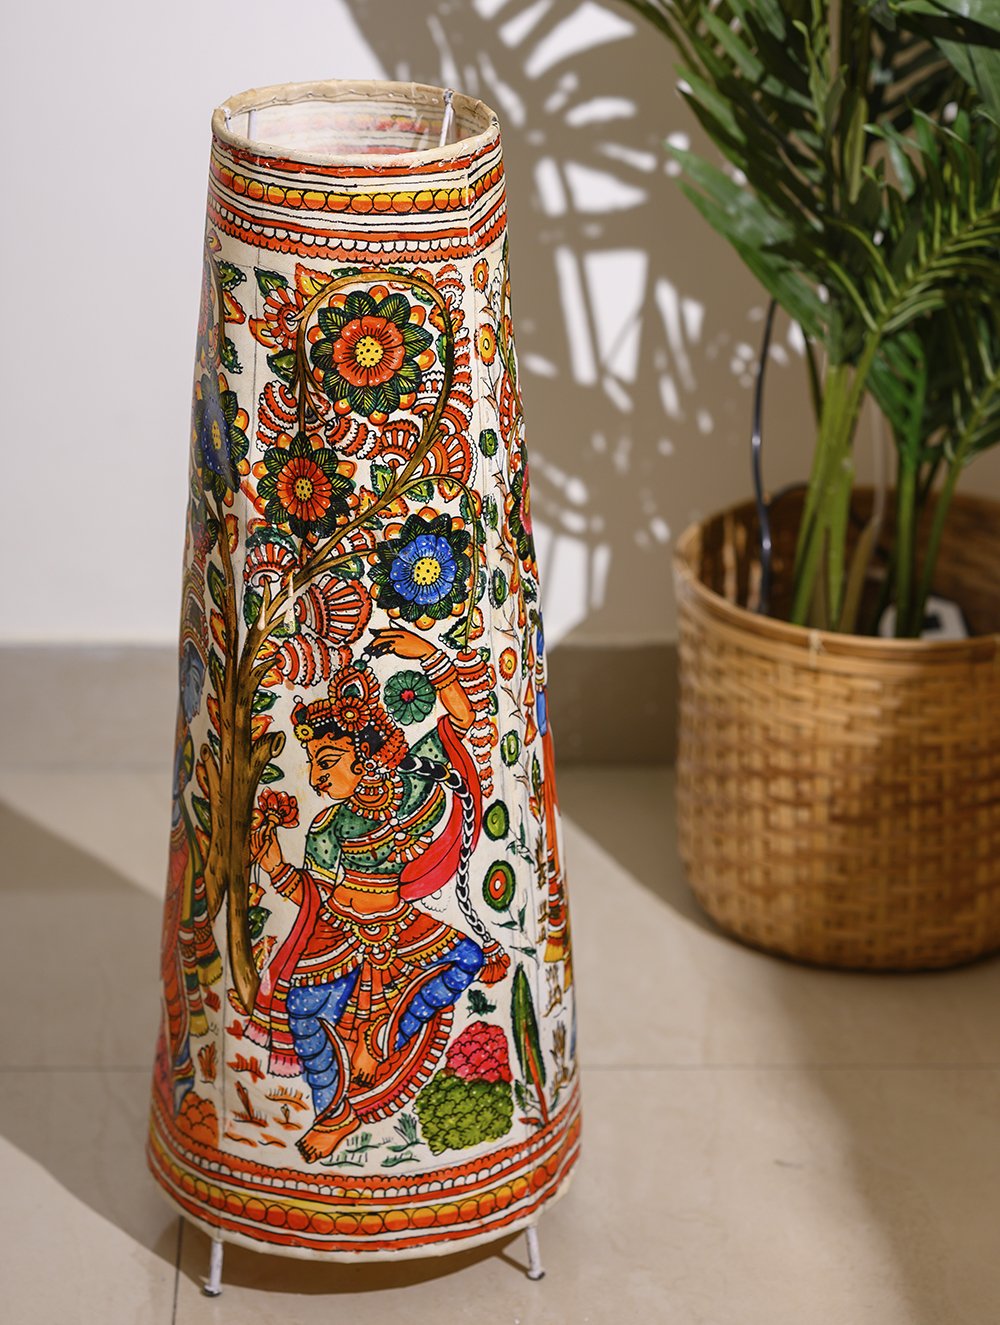 Load image into Gallery viewer, Andhra Leather Craft - Floor Lamp Shade (Large) - Radha Krishna